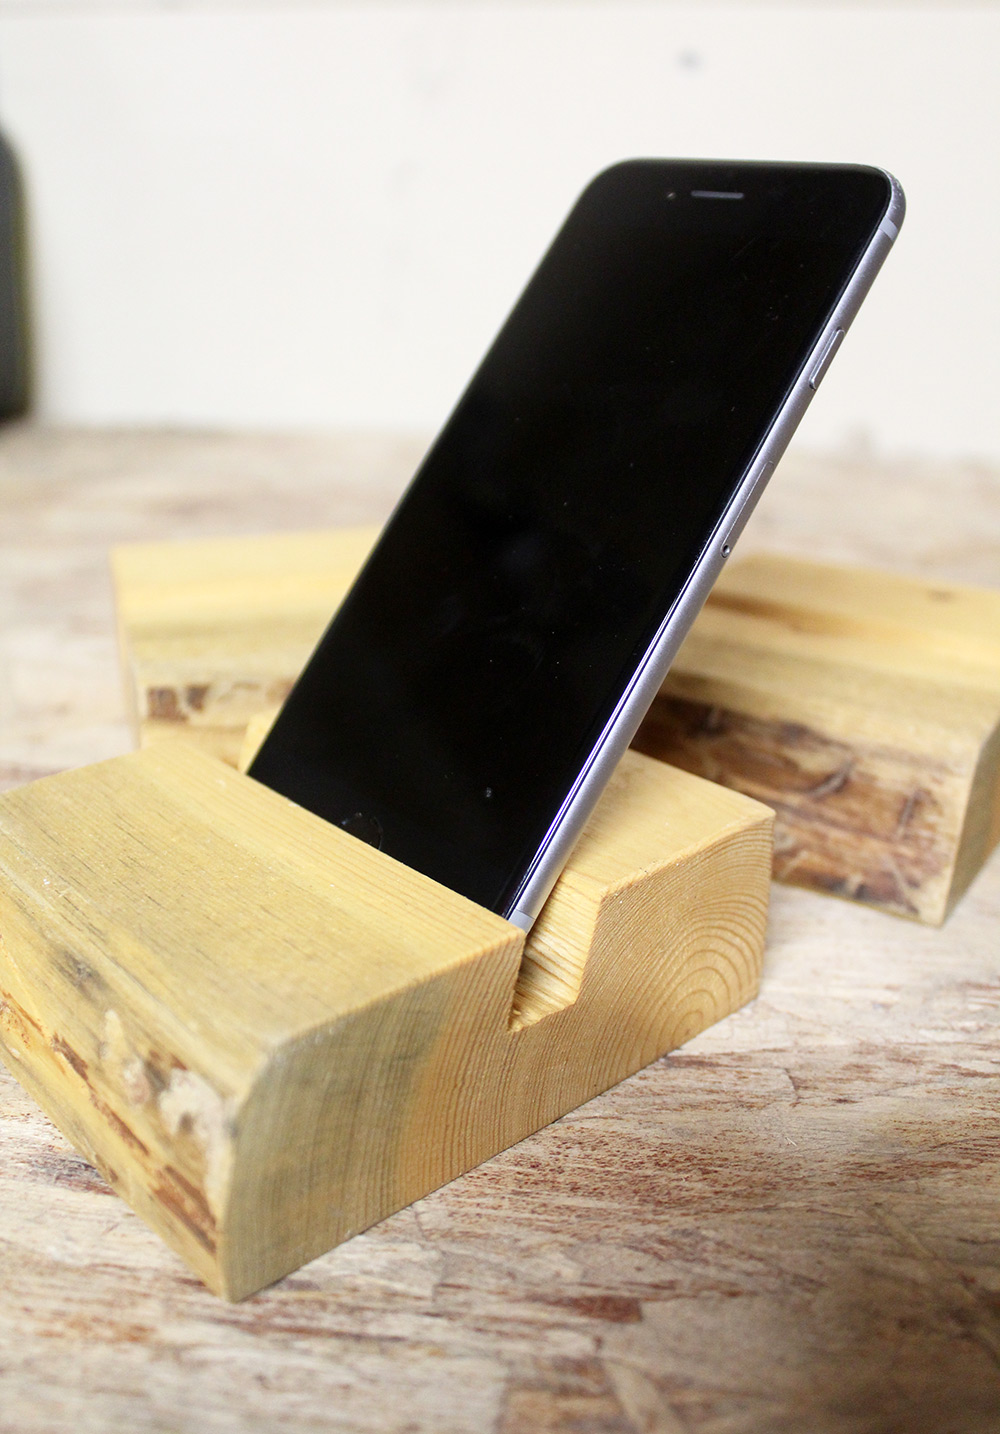 Lodgepole pine iPhone desk stand